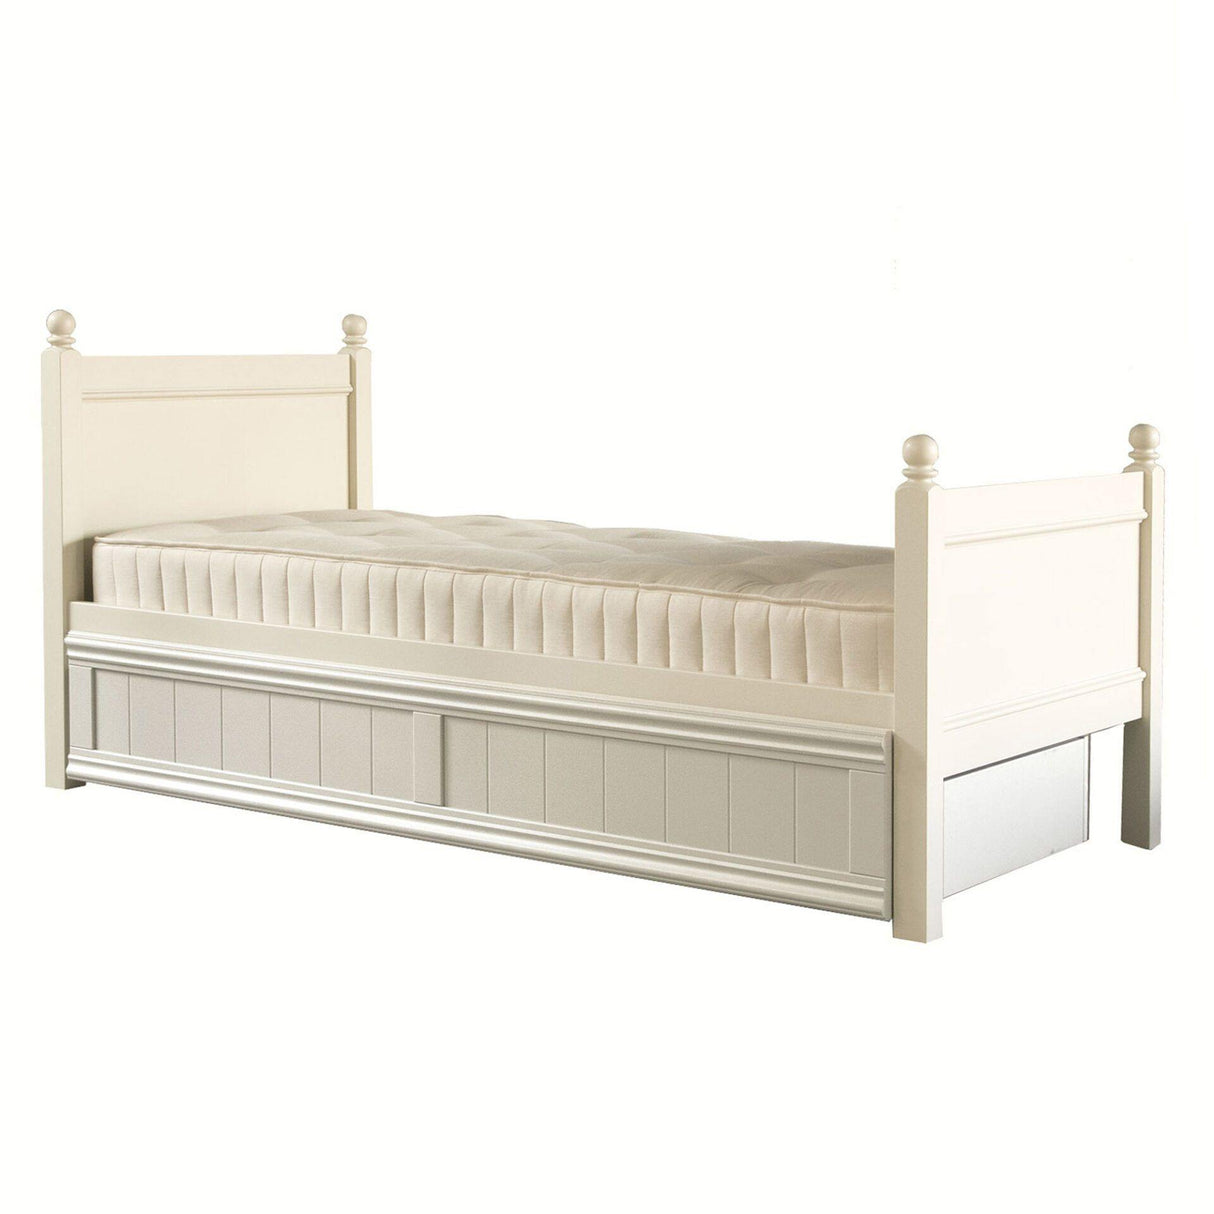 Little Folks Fargo Single Bed with Trundle In Ivory White - Little Snoozes